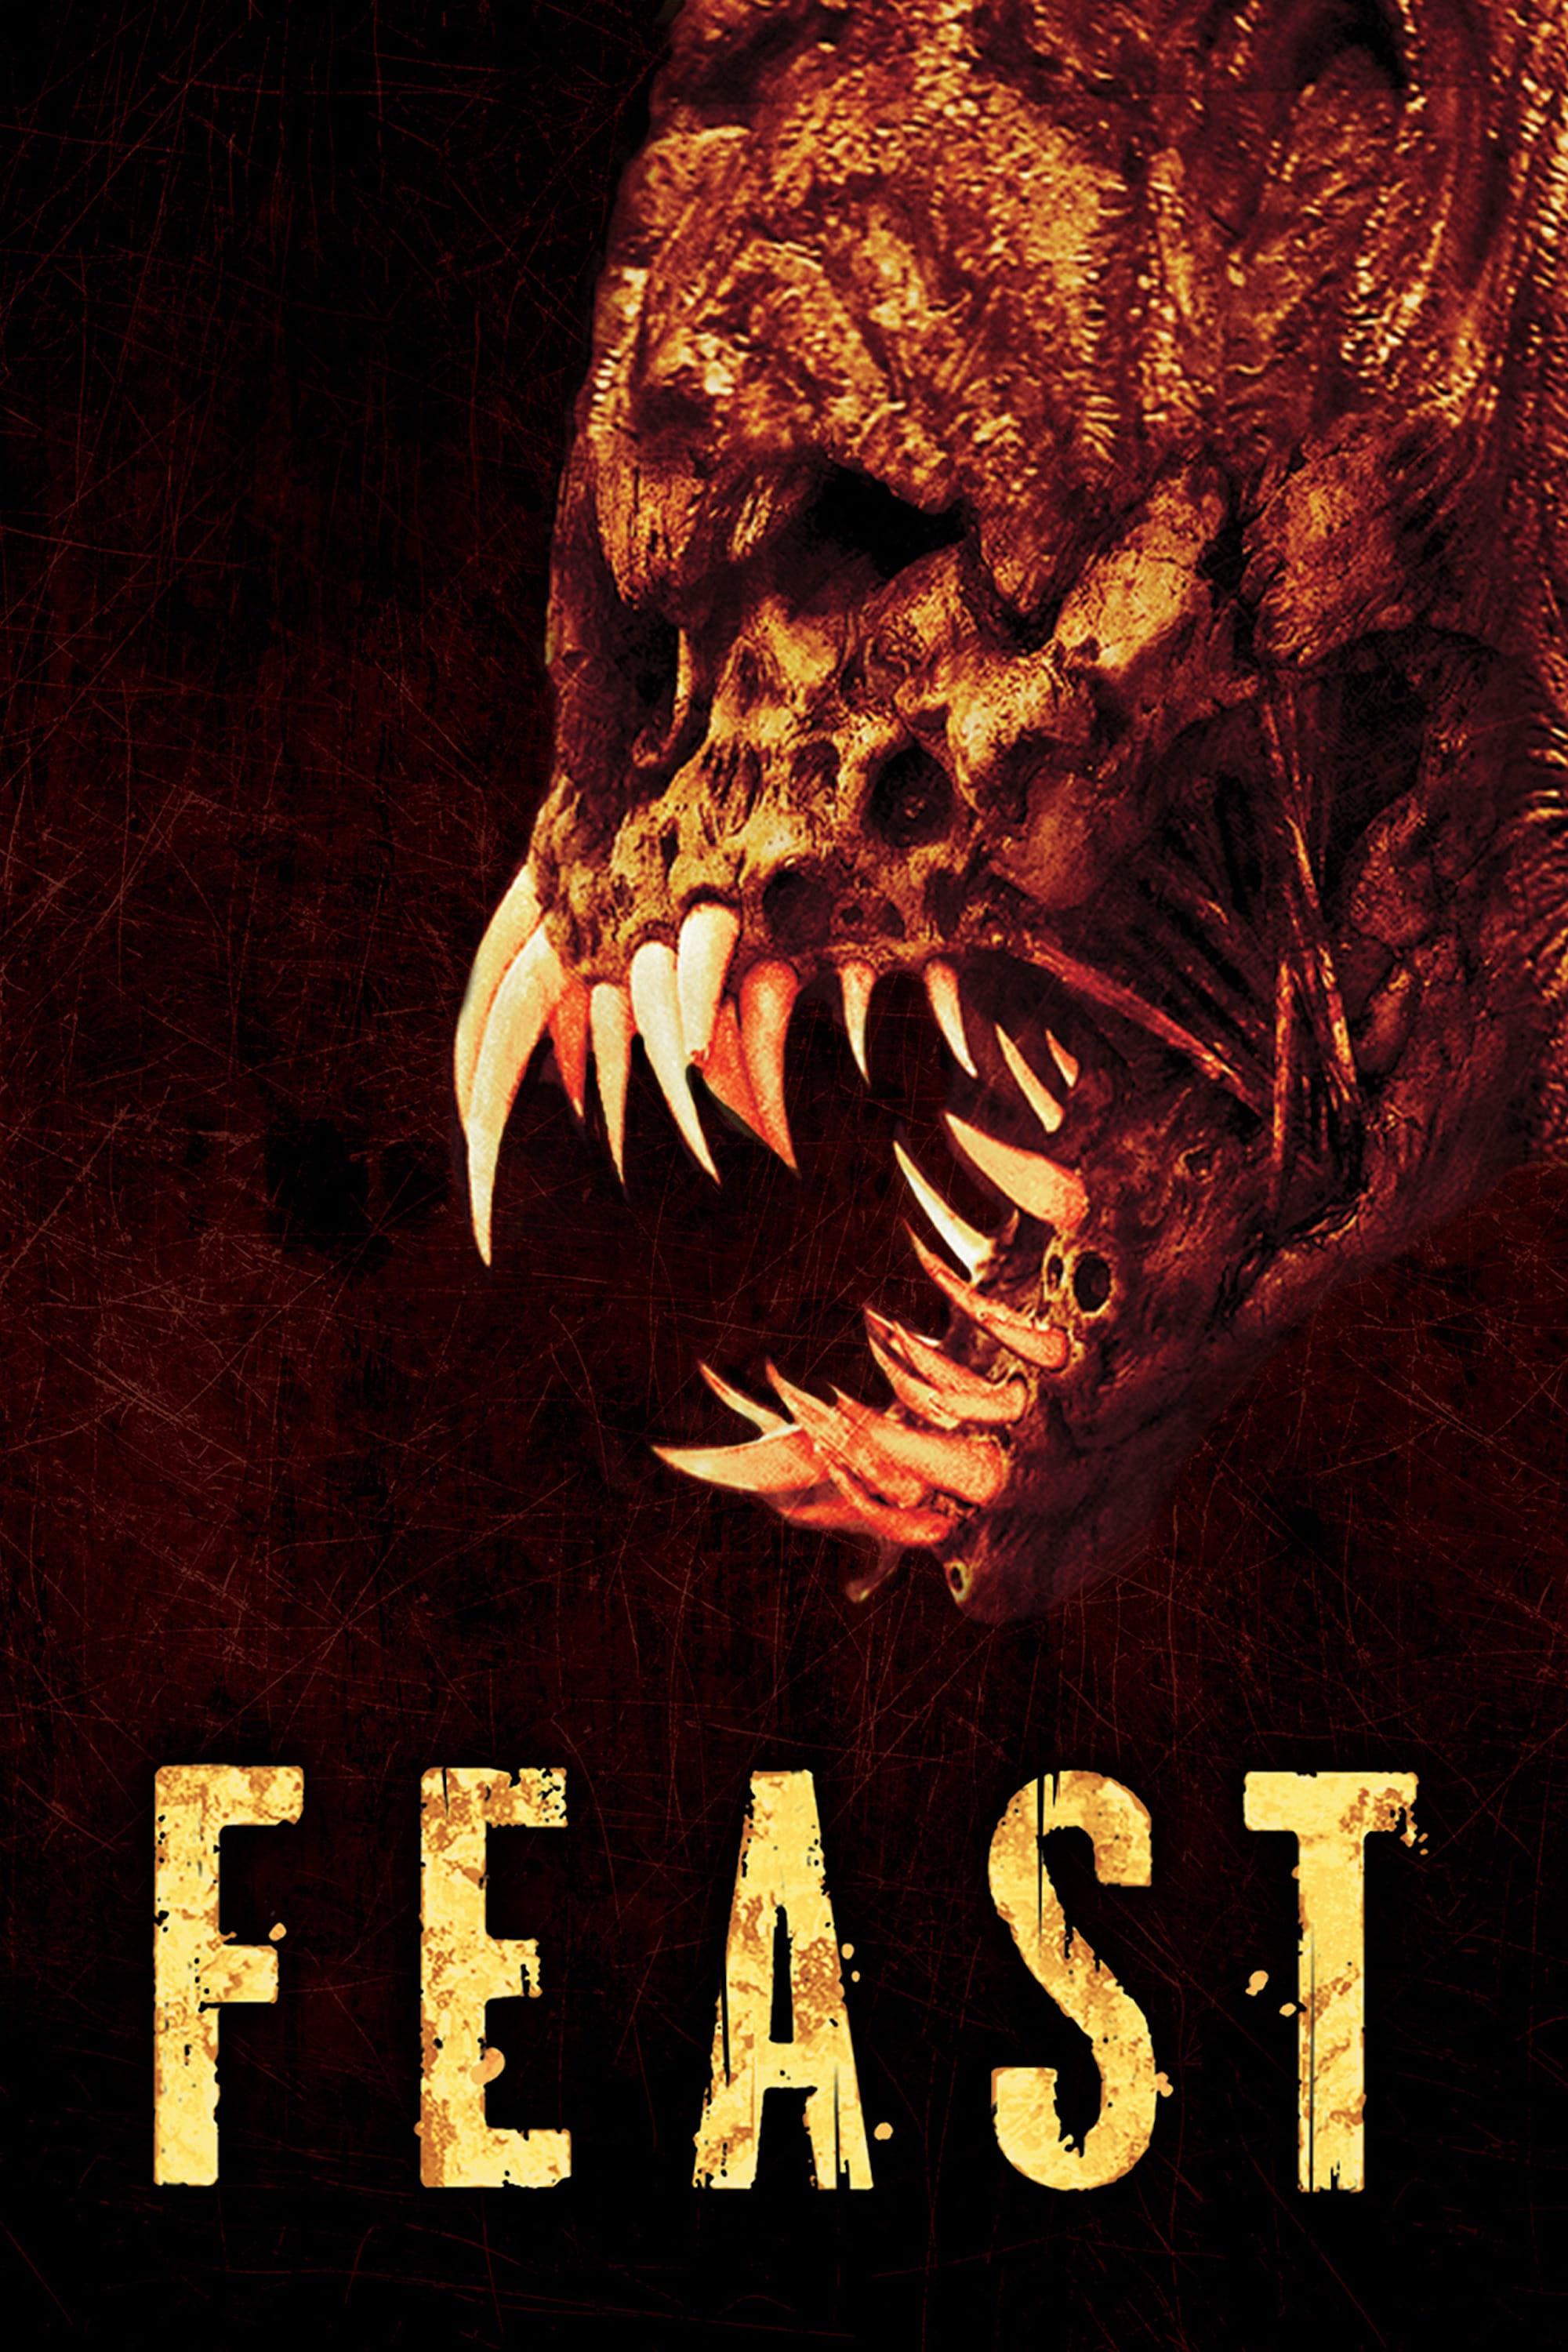 Feast poster